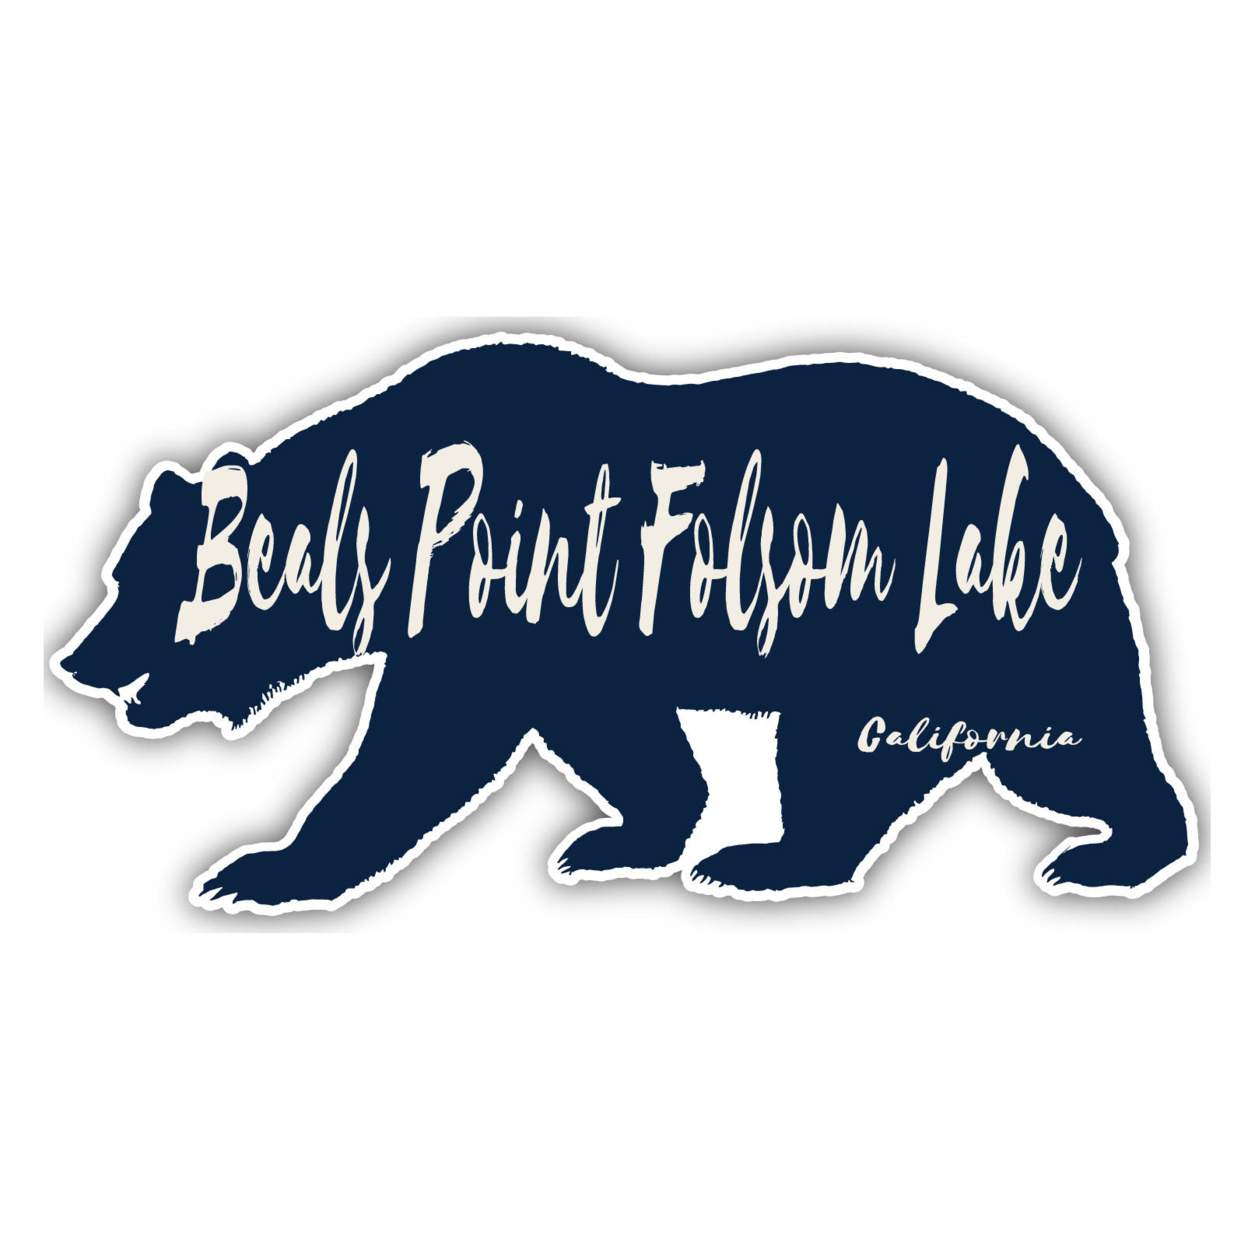 Beals Point Folsom Lake California Souvenir Decorative Stickers (Choose Theme And Size) - 4-Pack, 4-Inch, Bear